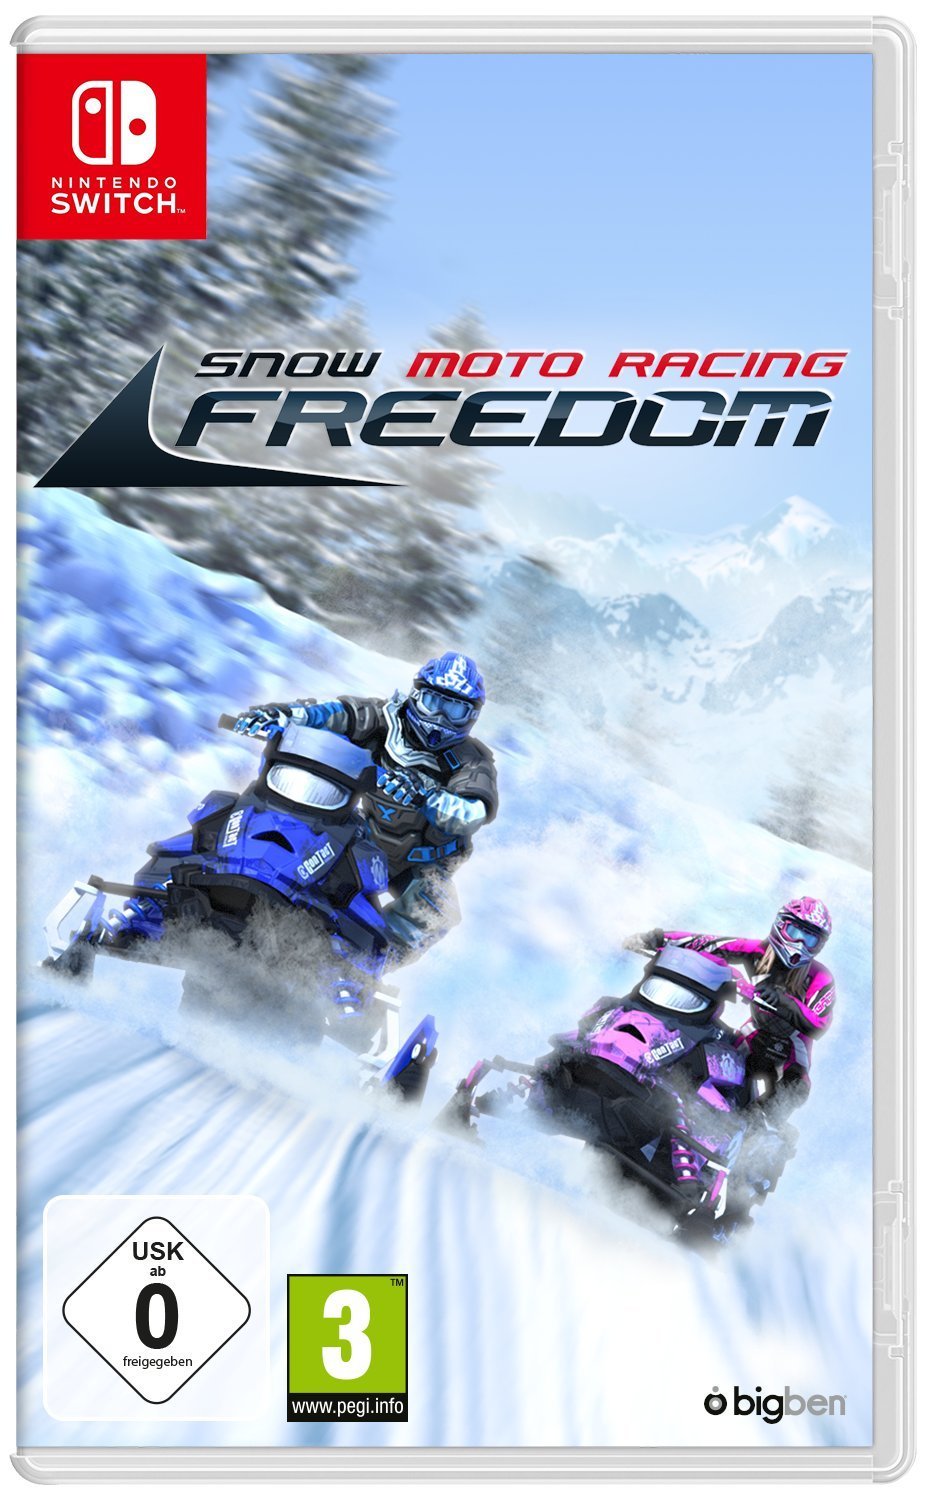 Switch® Snow Moto Racing Freedom game box front.